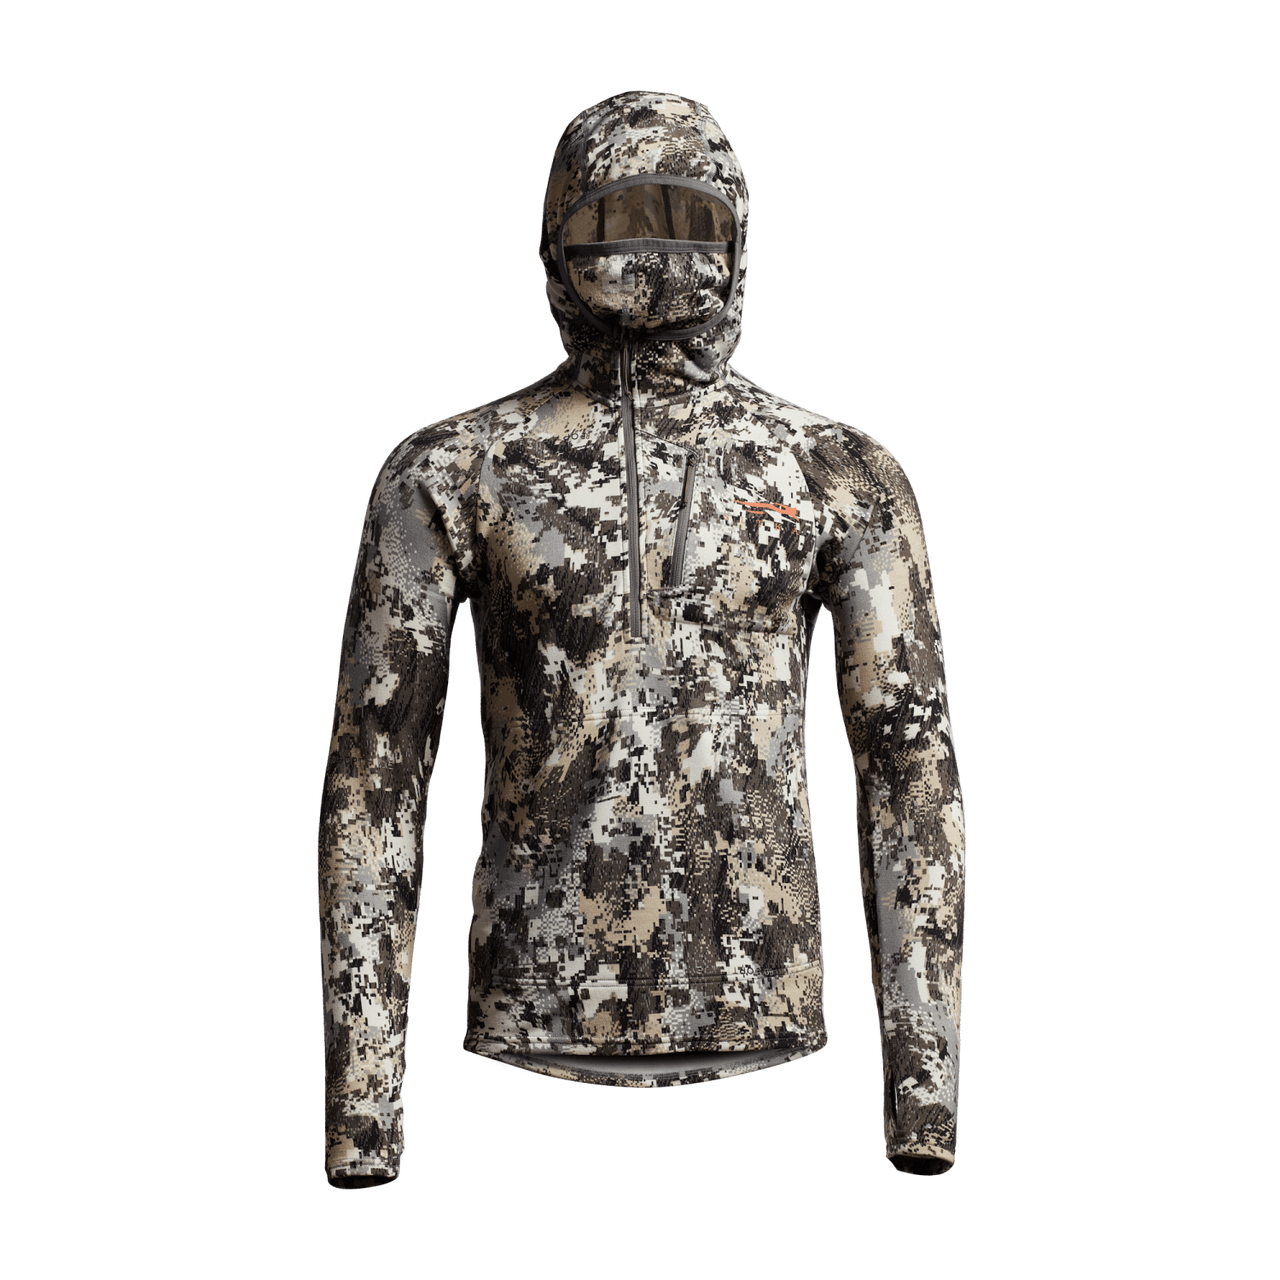 A lightweight and breathable hunting hoodie in shades of brown and green, featuring a hood, a moisture-wicking merino wool interior, and flatlock seams for chafe-free comfort.